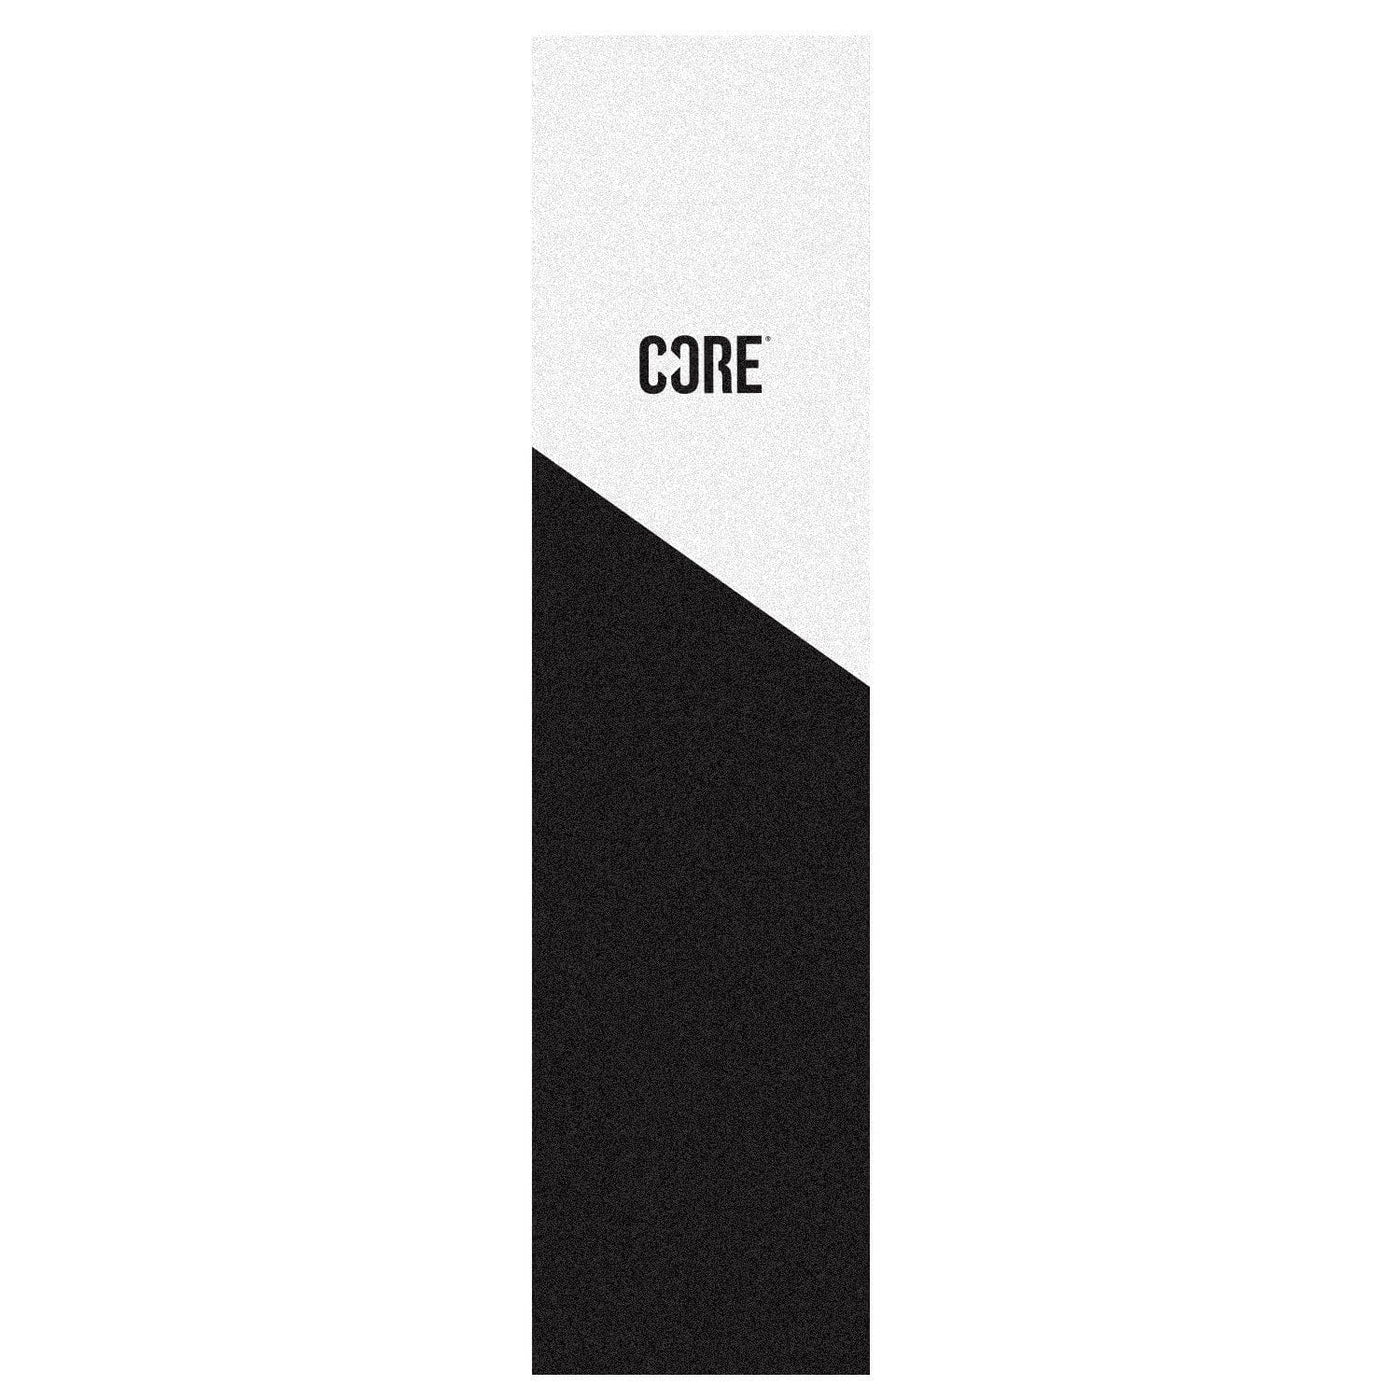 Core Scooter Grip Tape Split White I Grip Tape Scooter